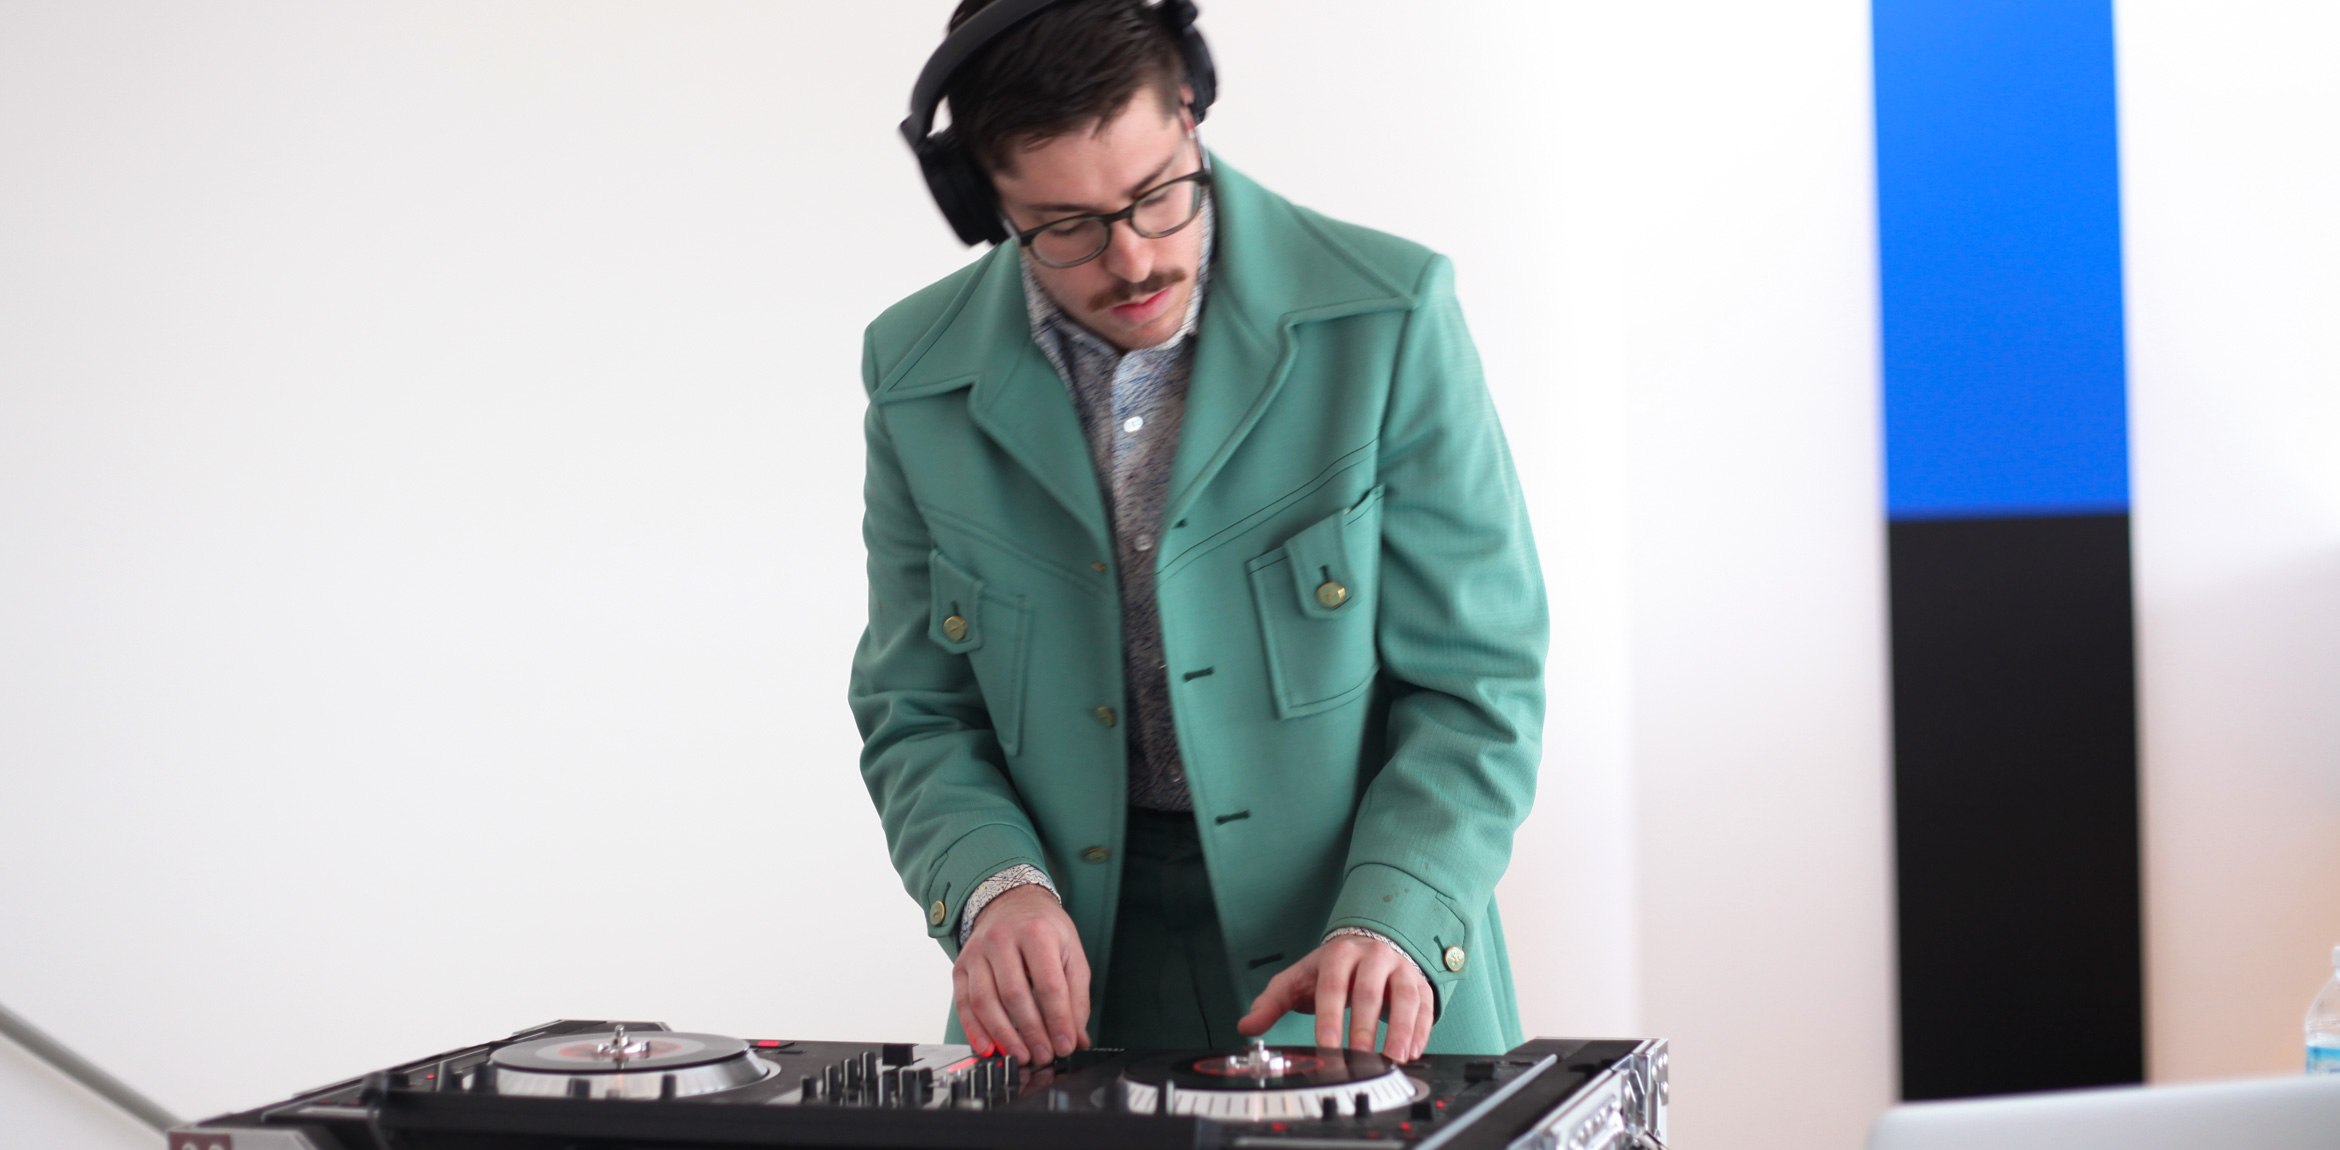 A DJ mixing at a turntable in the main gallery, with 